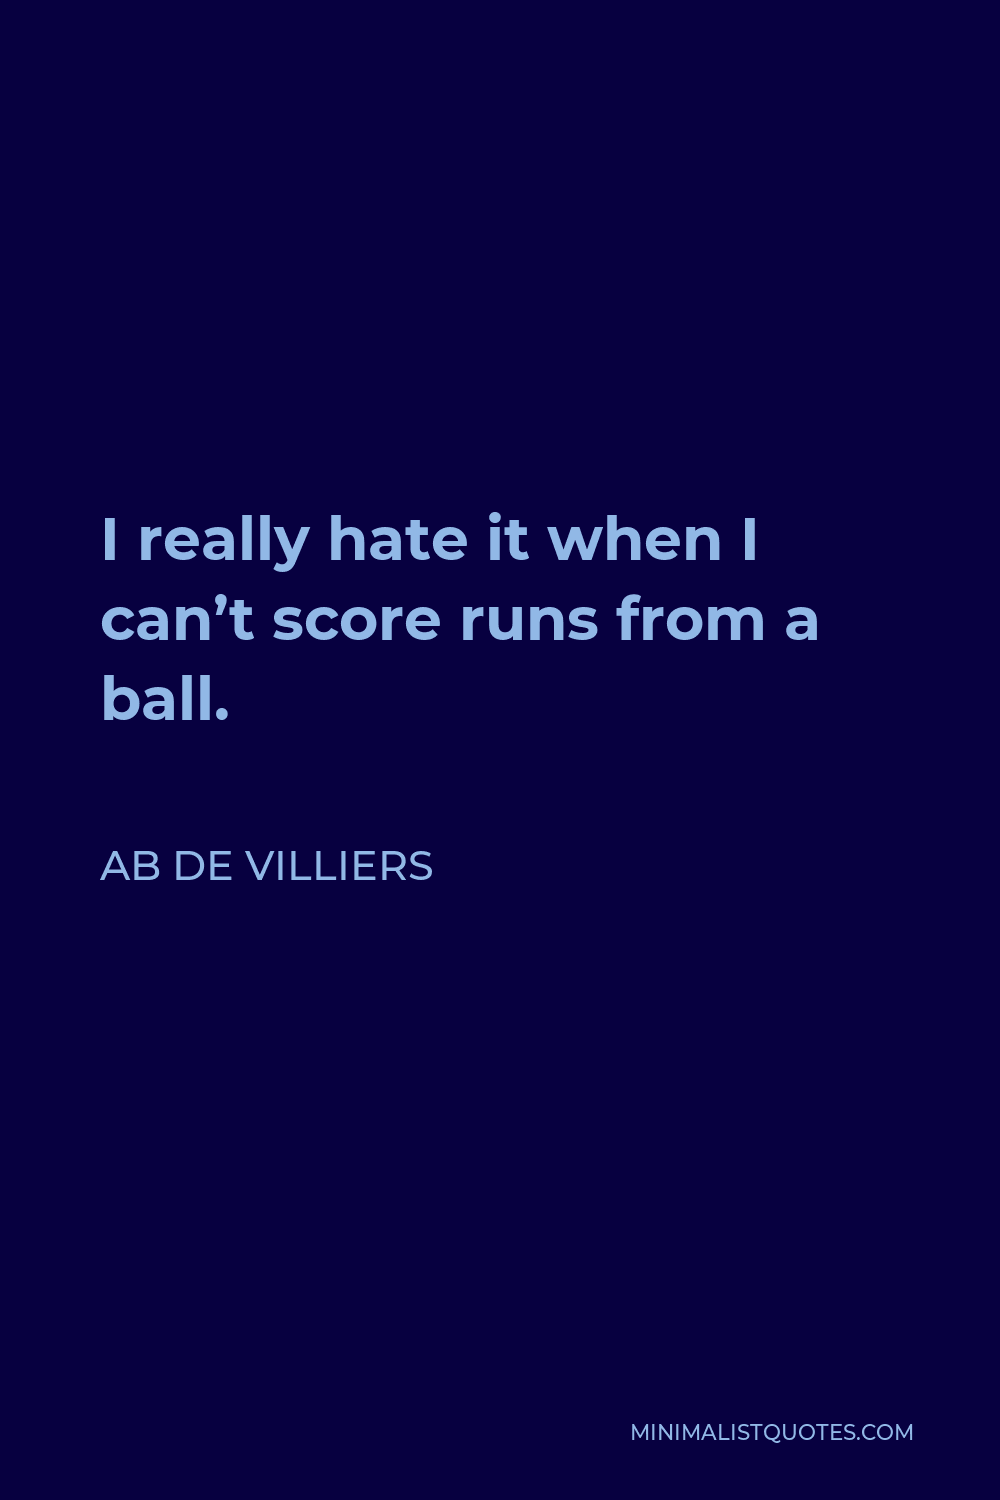 AB de Villiers Quote - I really hate it when I can’t score runs from a ball.